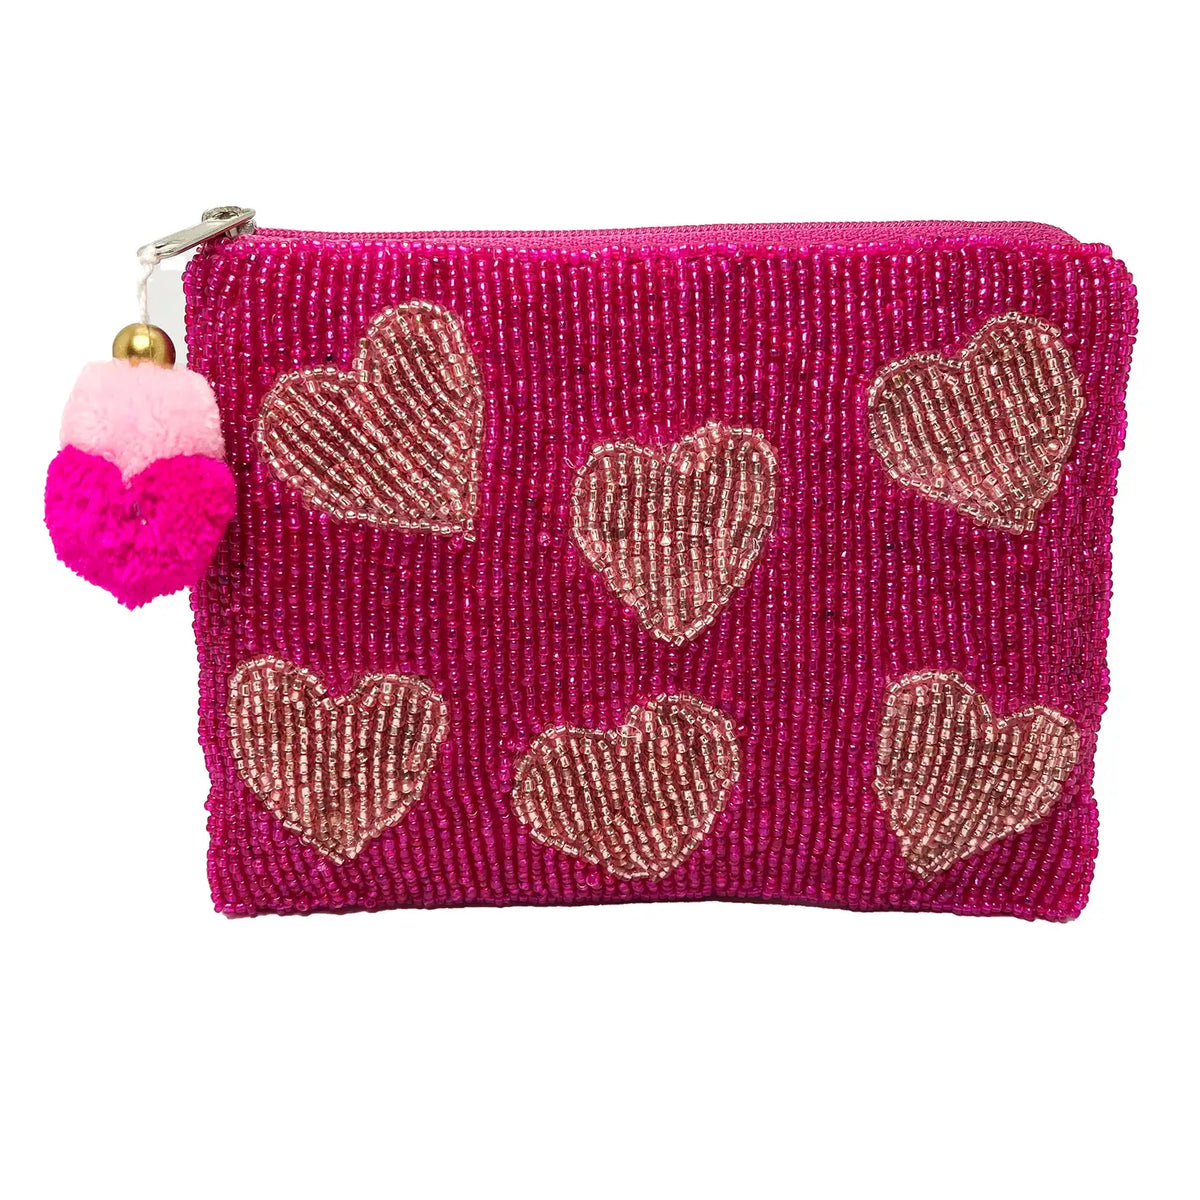 Concepts Reno Beaded Heart coin pouch pink/pink hearts